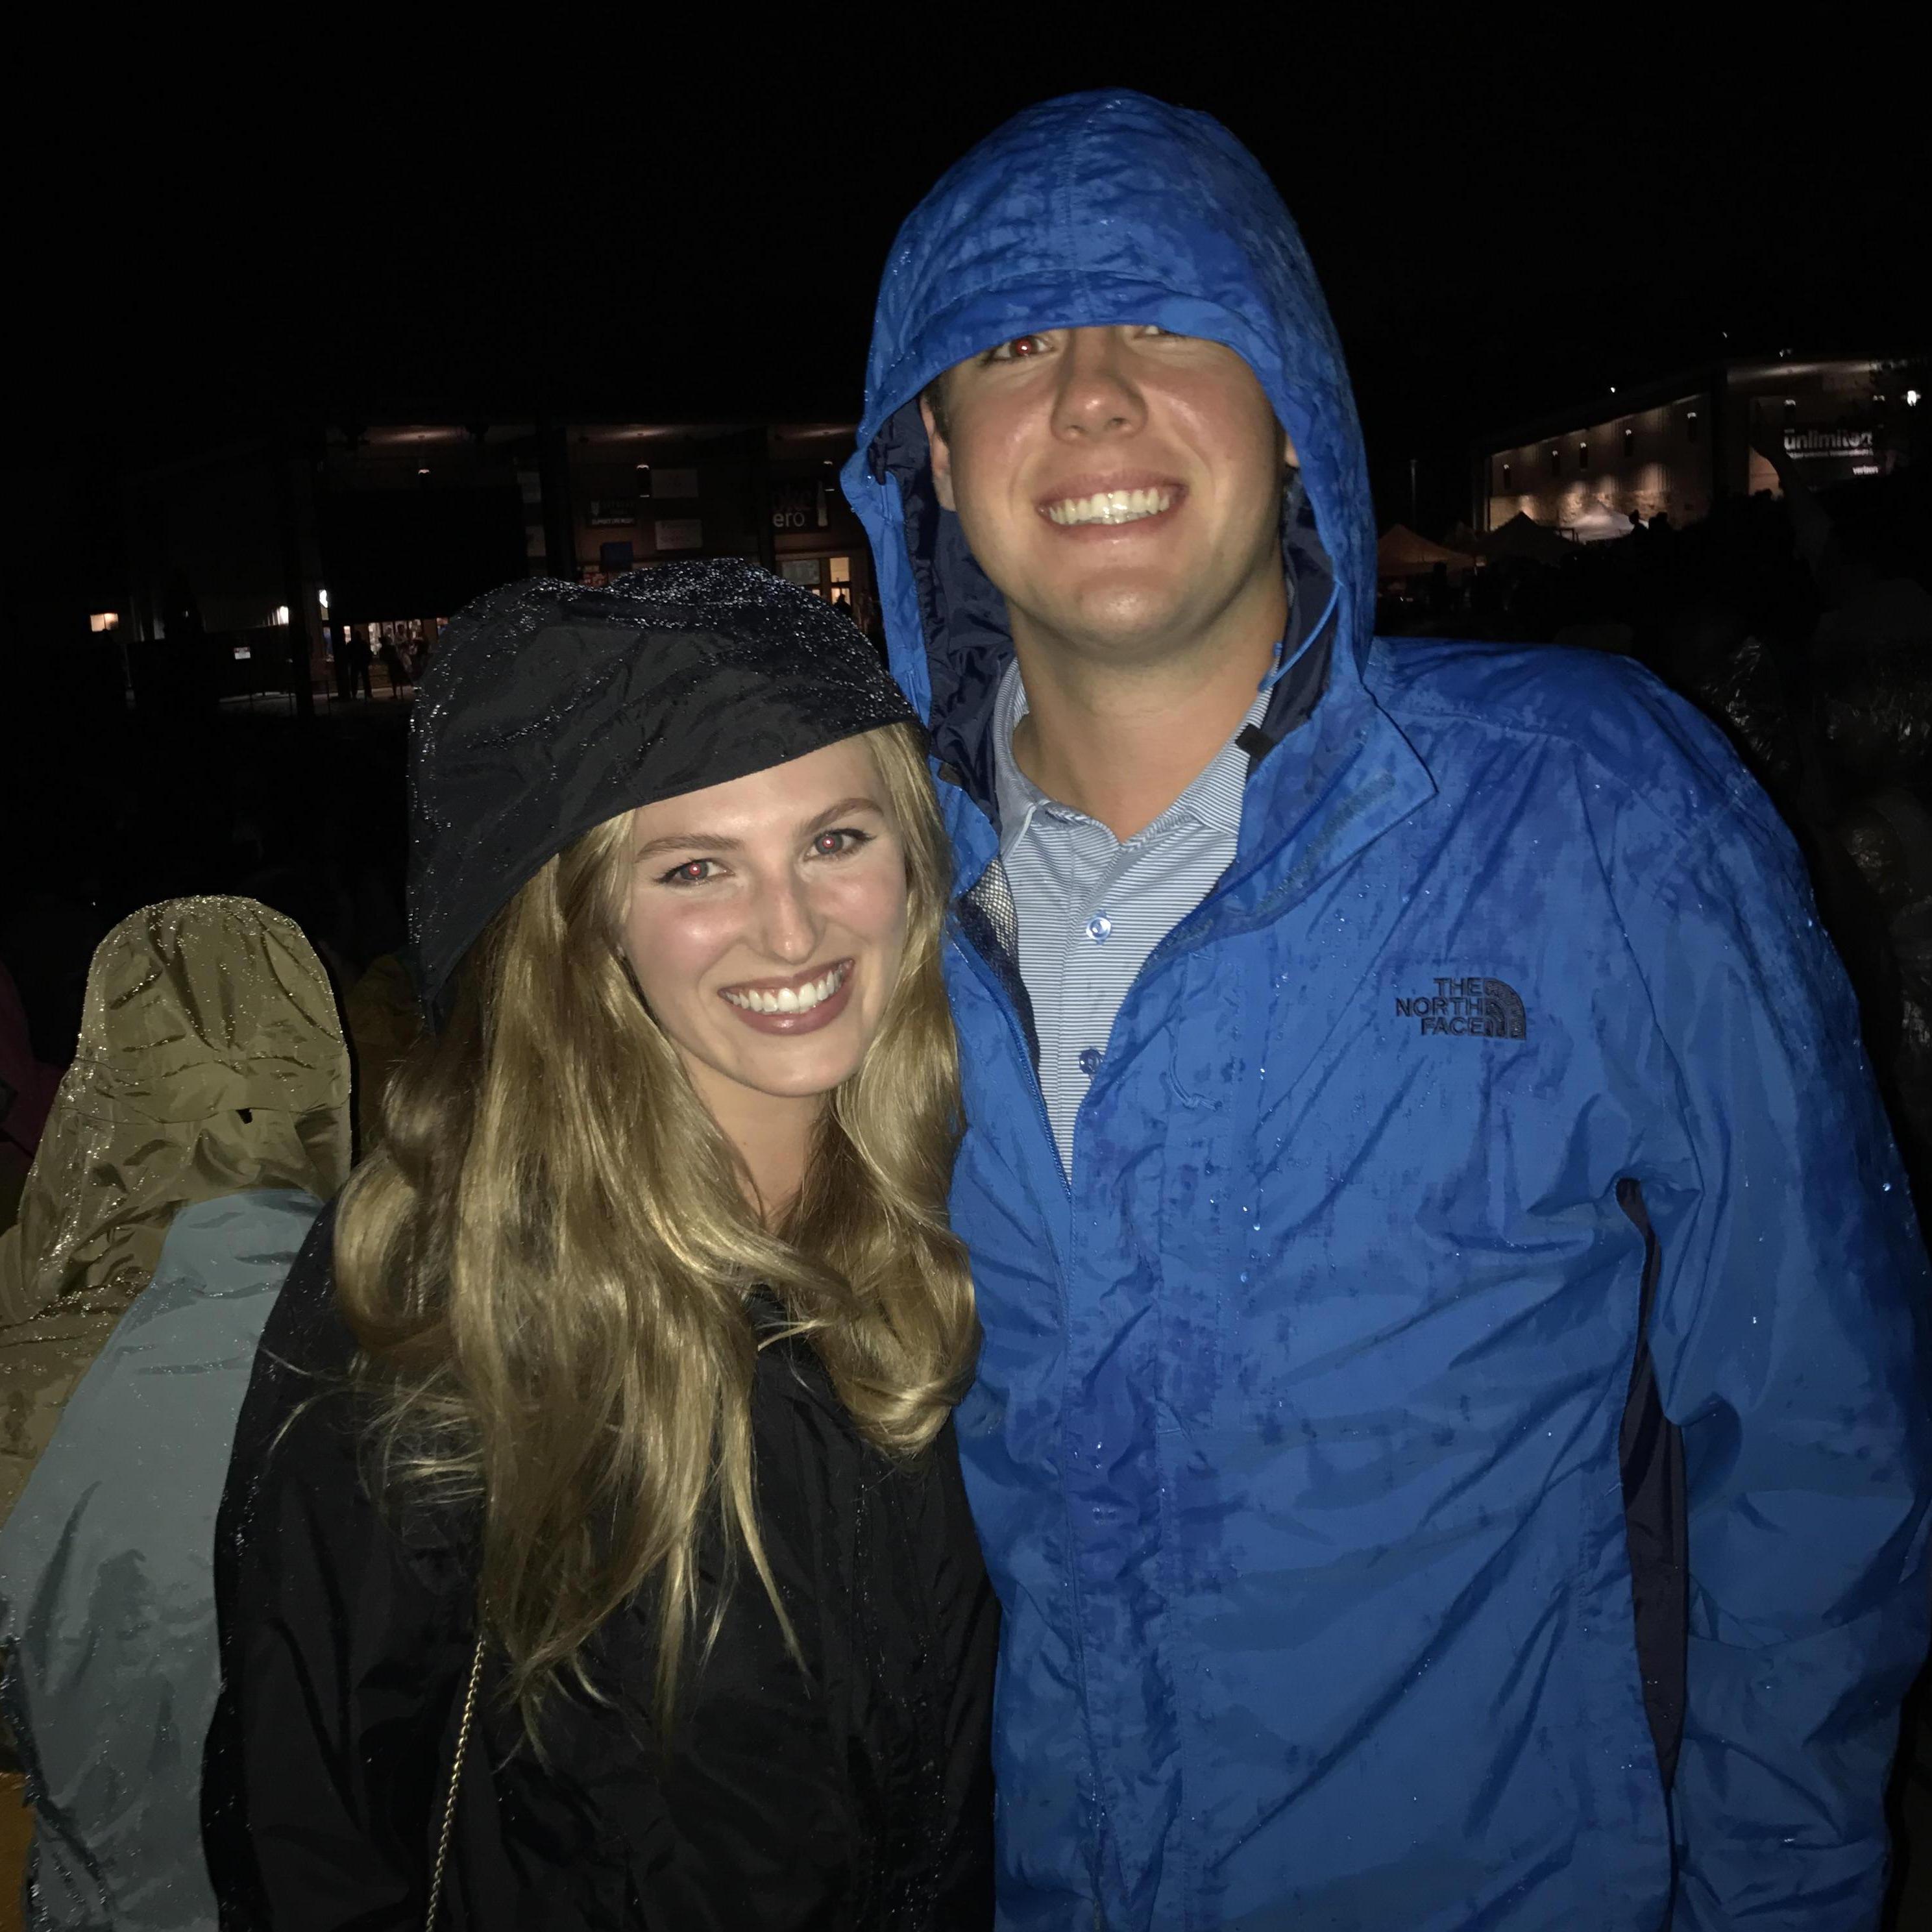 Our first date. Dave Matthews concert in the rain. May 2017